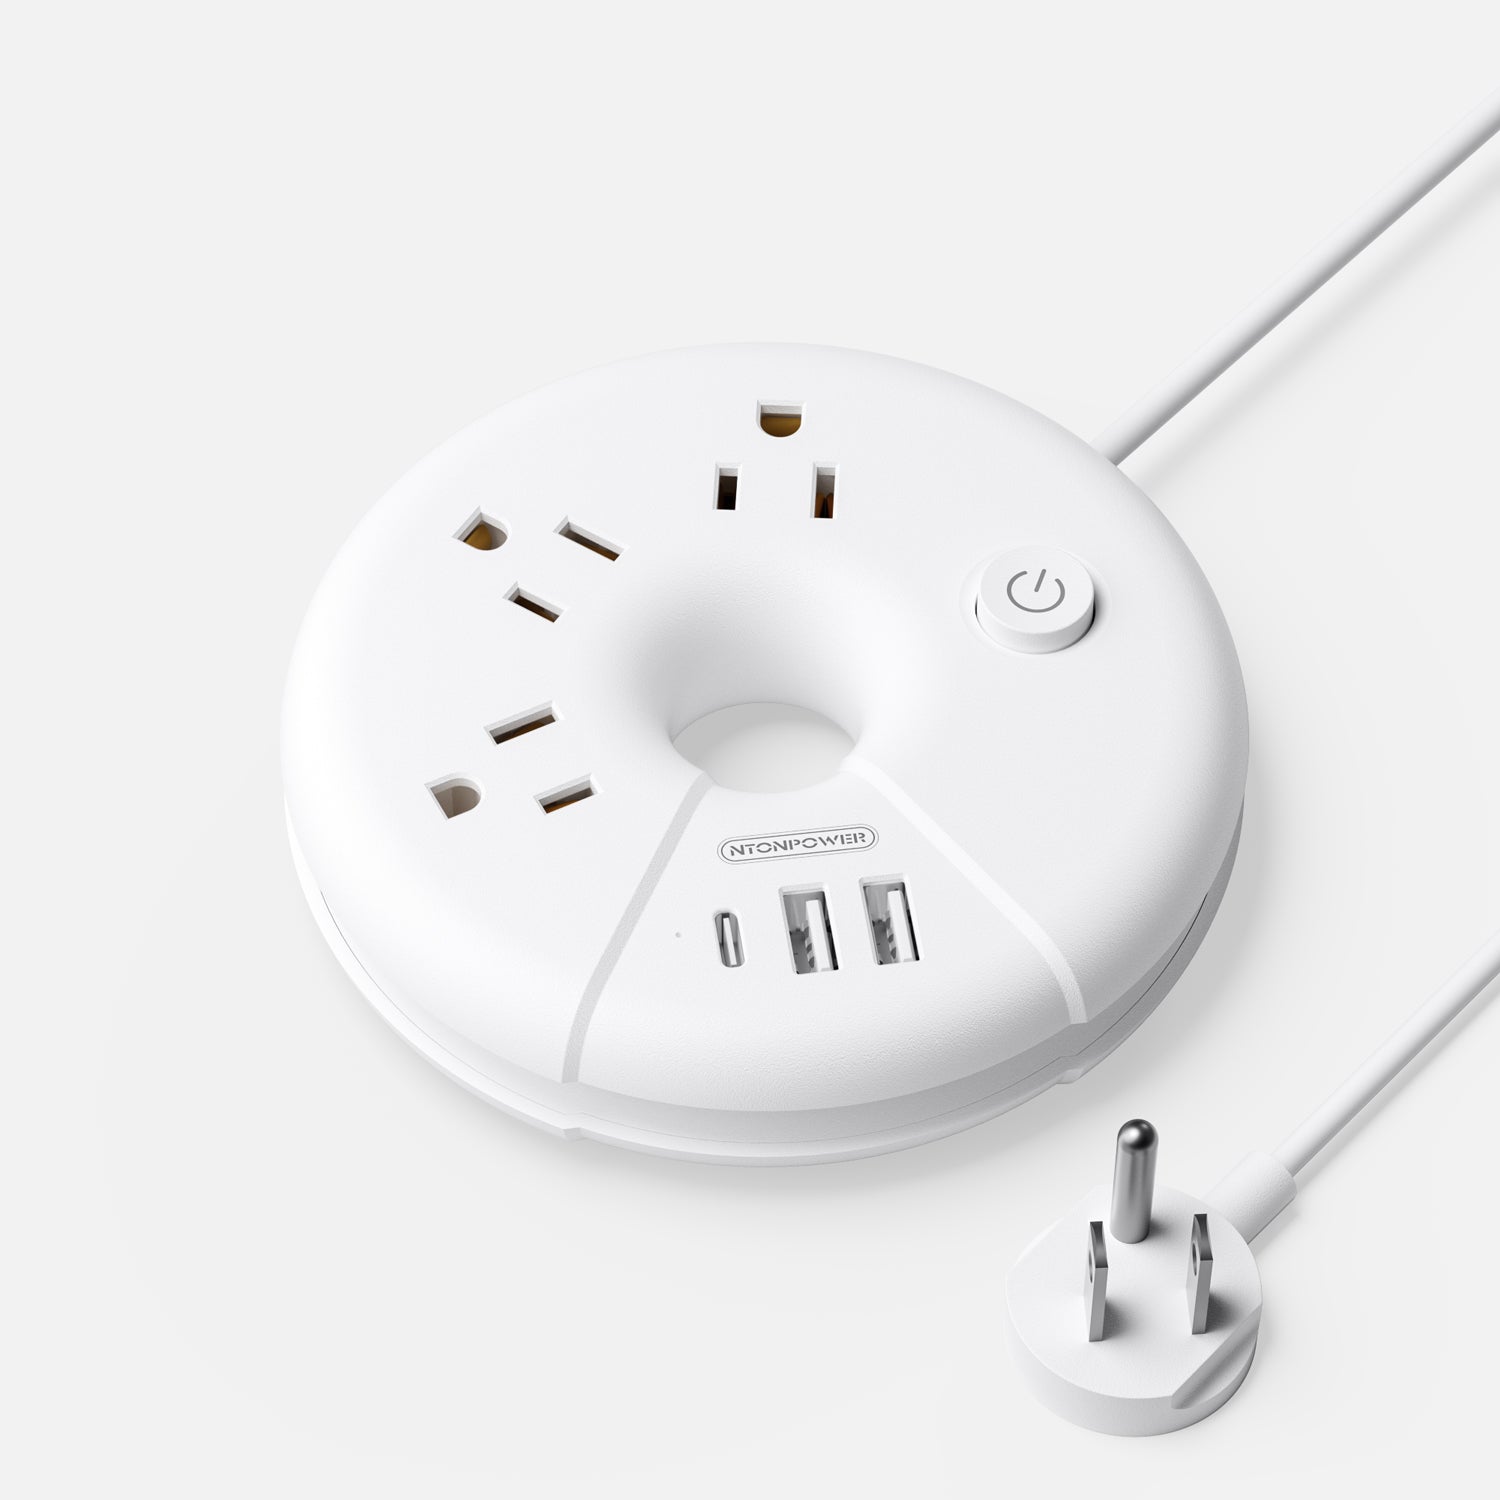 Ntonpower New i-Donut Power Strip 3 Outlets 2 USB-A 1 Type C